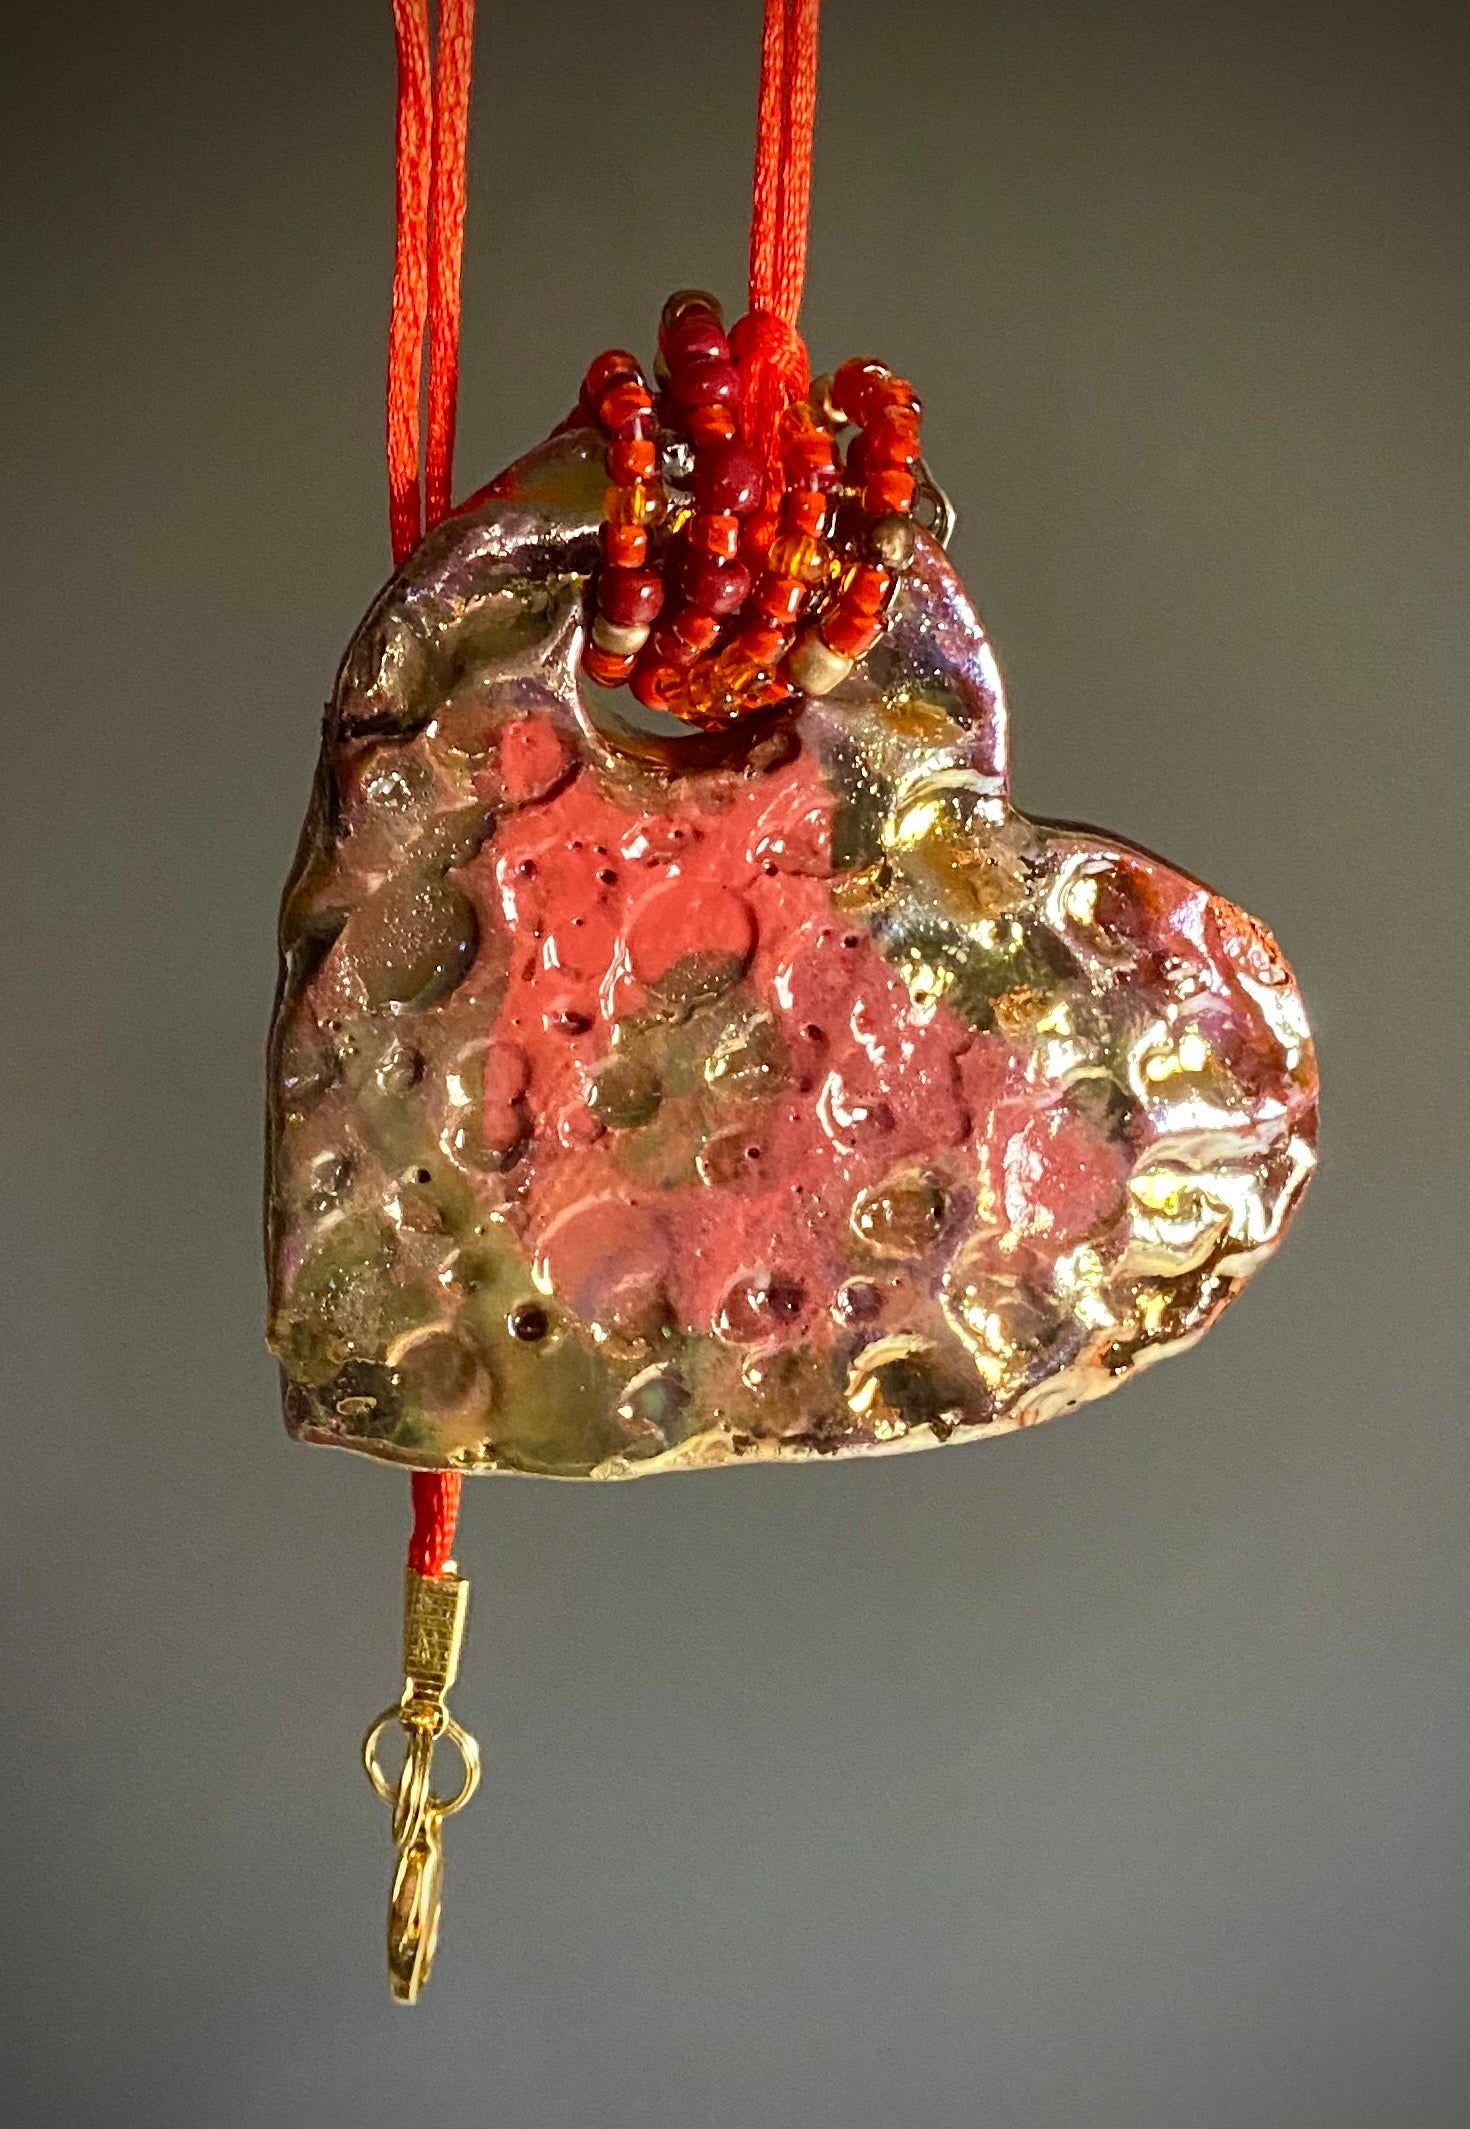 Have A Heart ! Each heart pendant is handmade with love! It is 3"x 3" and weighs approx. 3ozs. This pendant has a red violet and gold metallic raku glazes that renders a unique translucent  patina. The heart has a textured pattern . Both sides are  are different and equally beautiful! It holds a spiral of red violet mini beads on a spiral copper wire. This pendant has a nice 12" red suede cord!